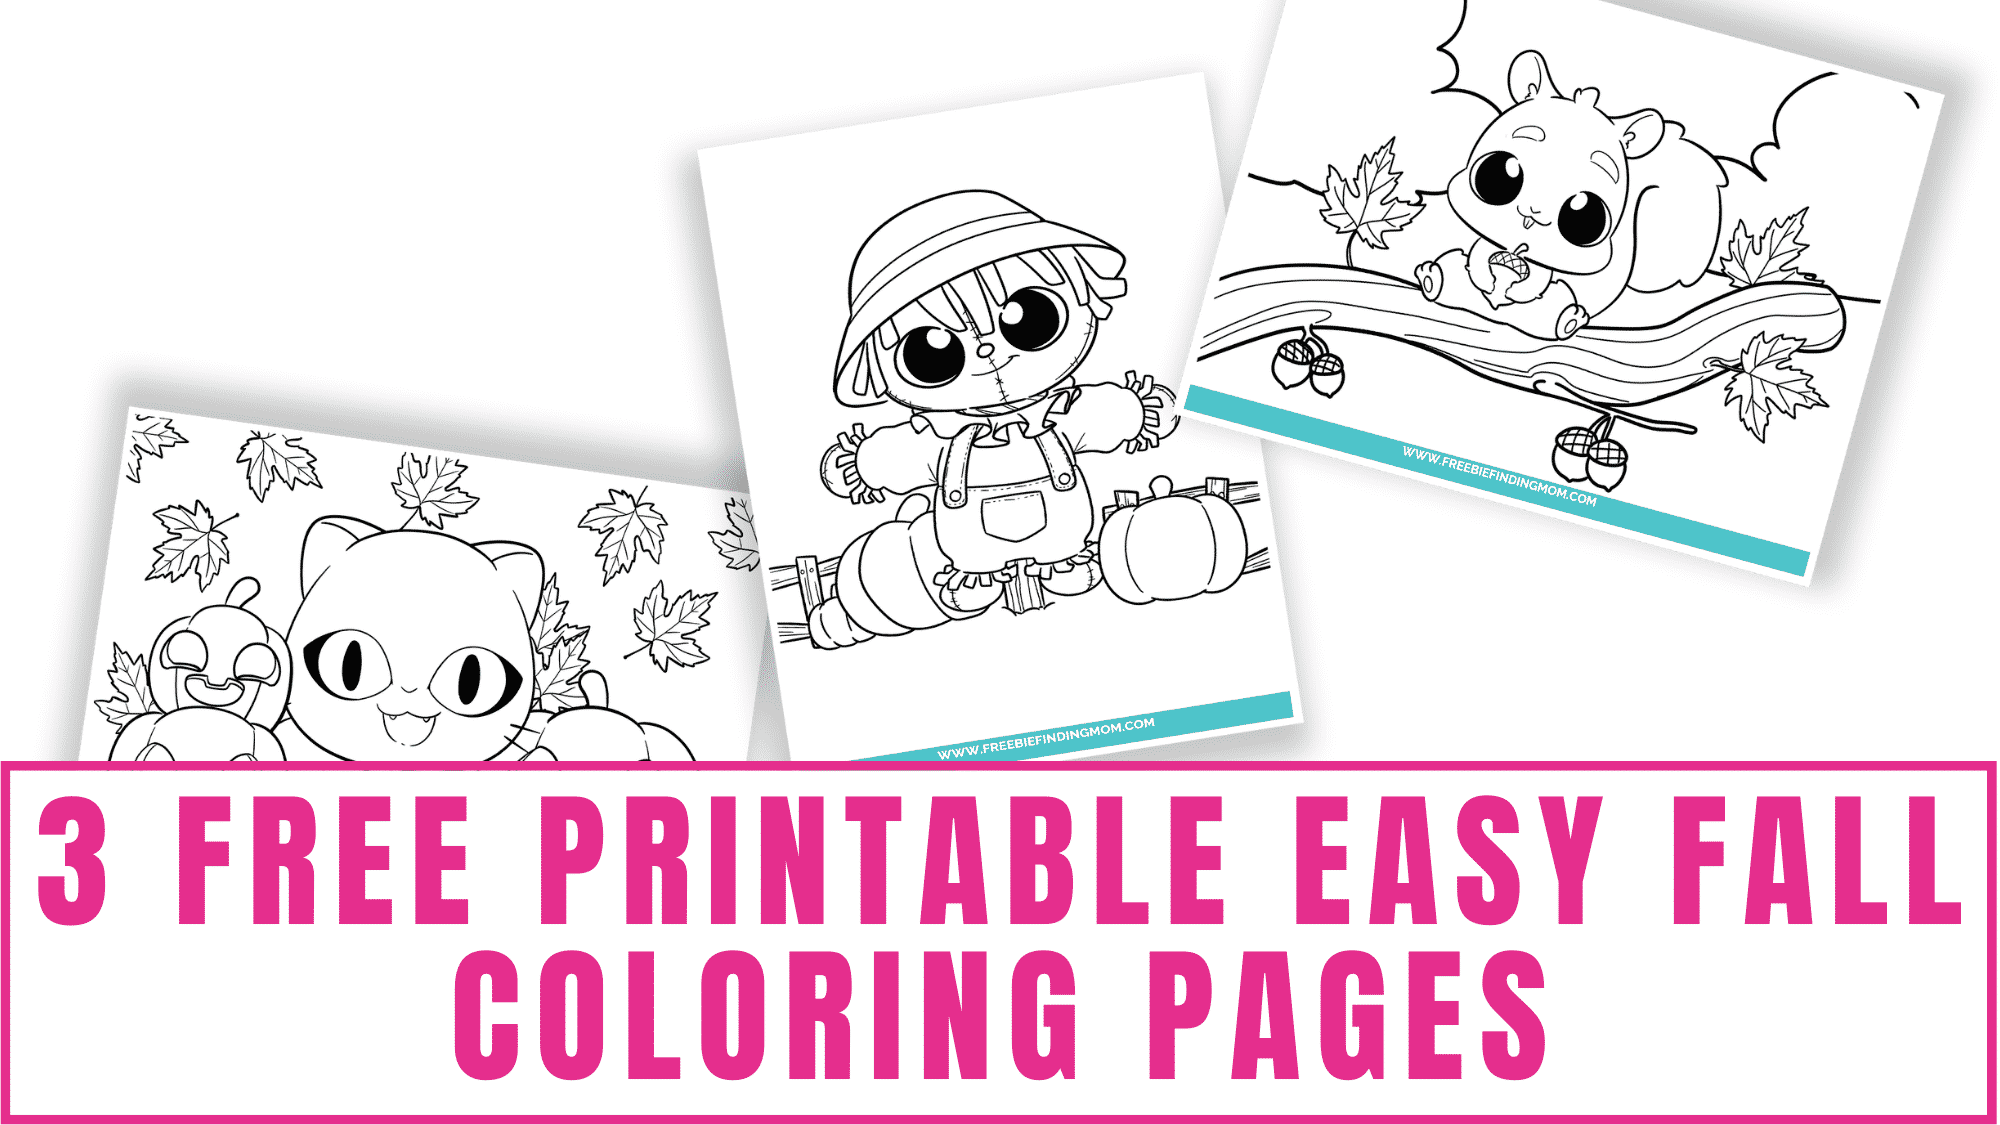 Free printable easy fall coloring pages